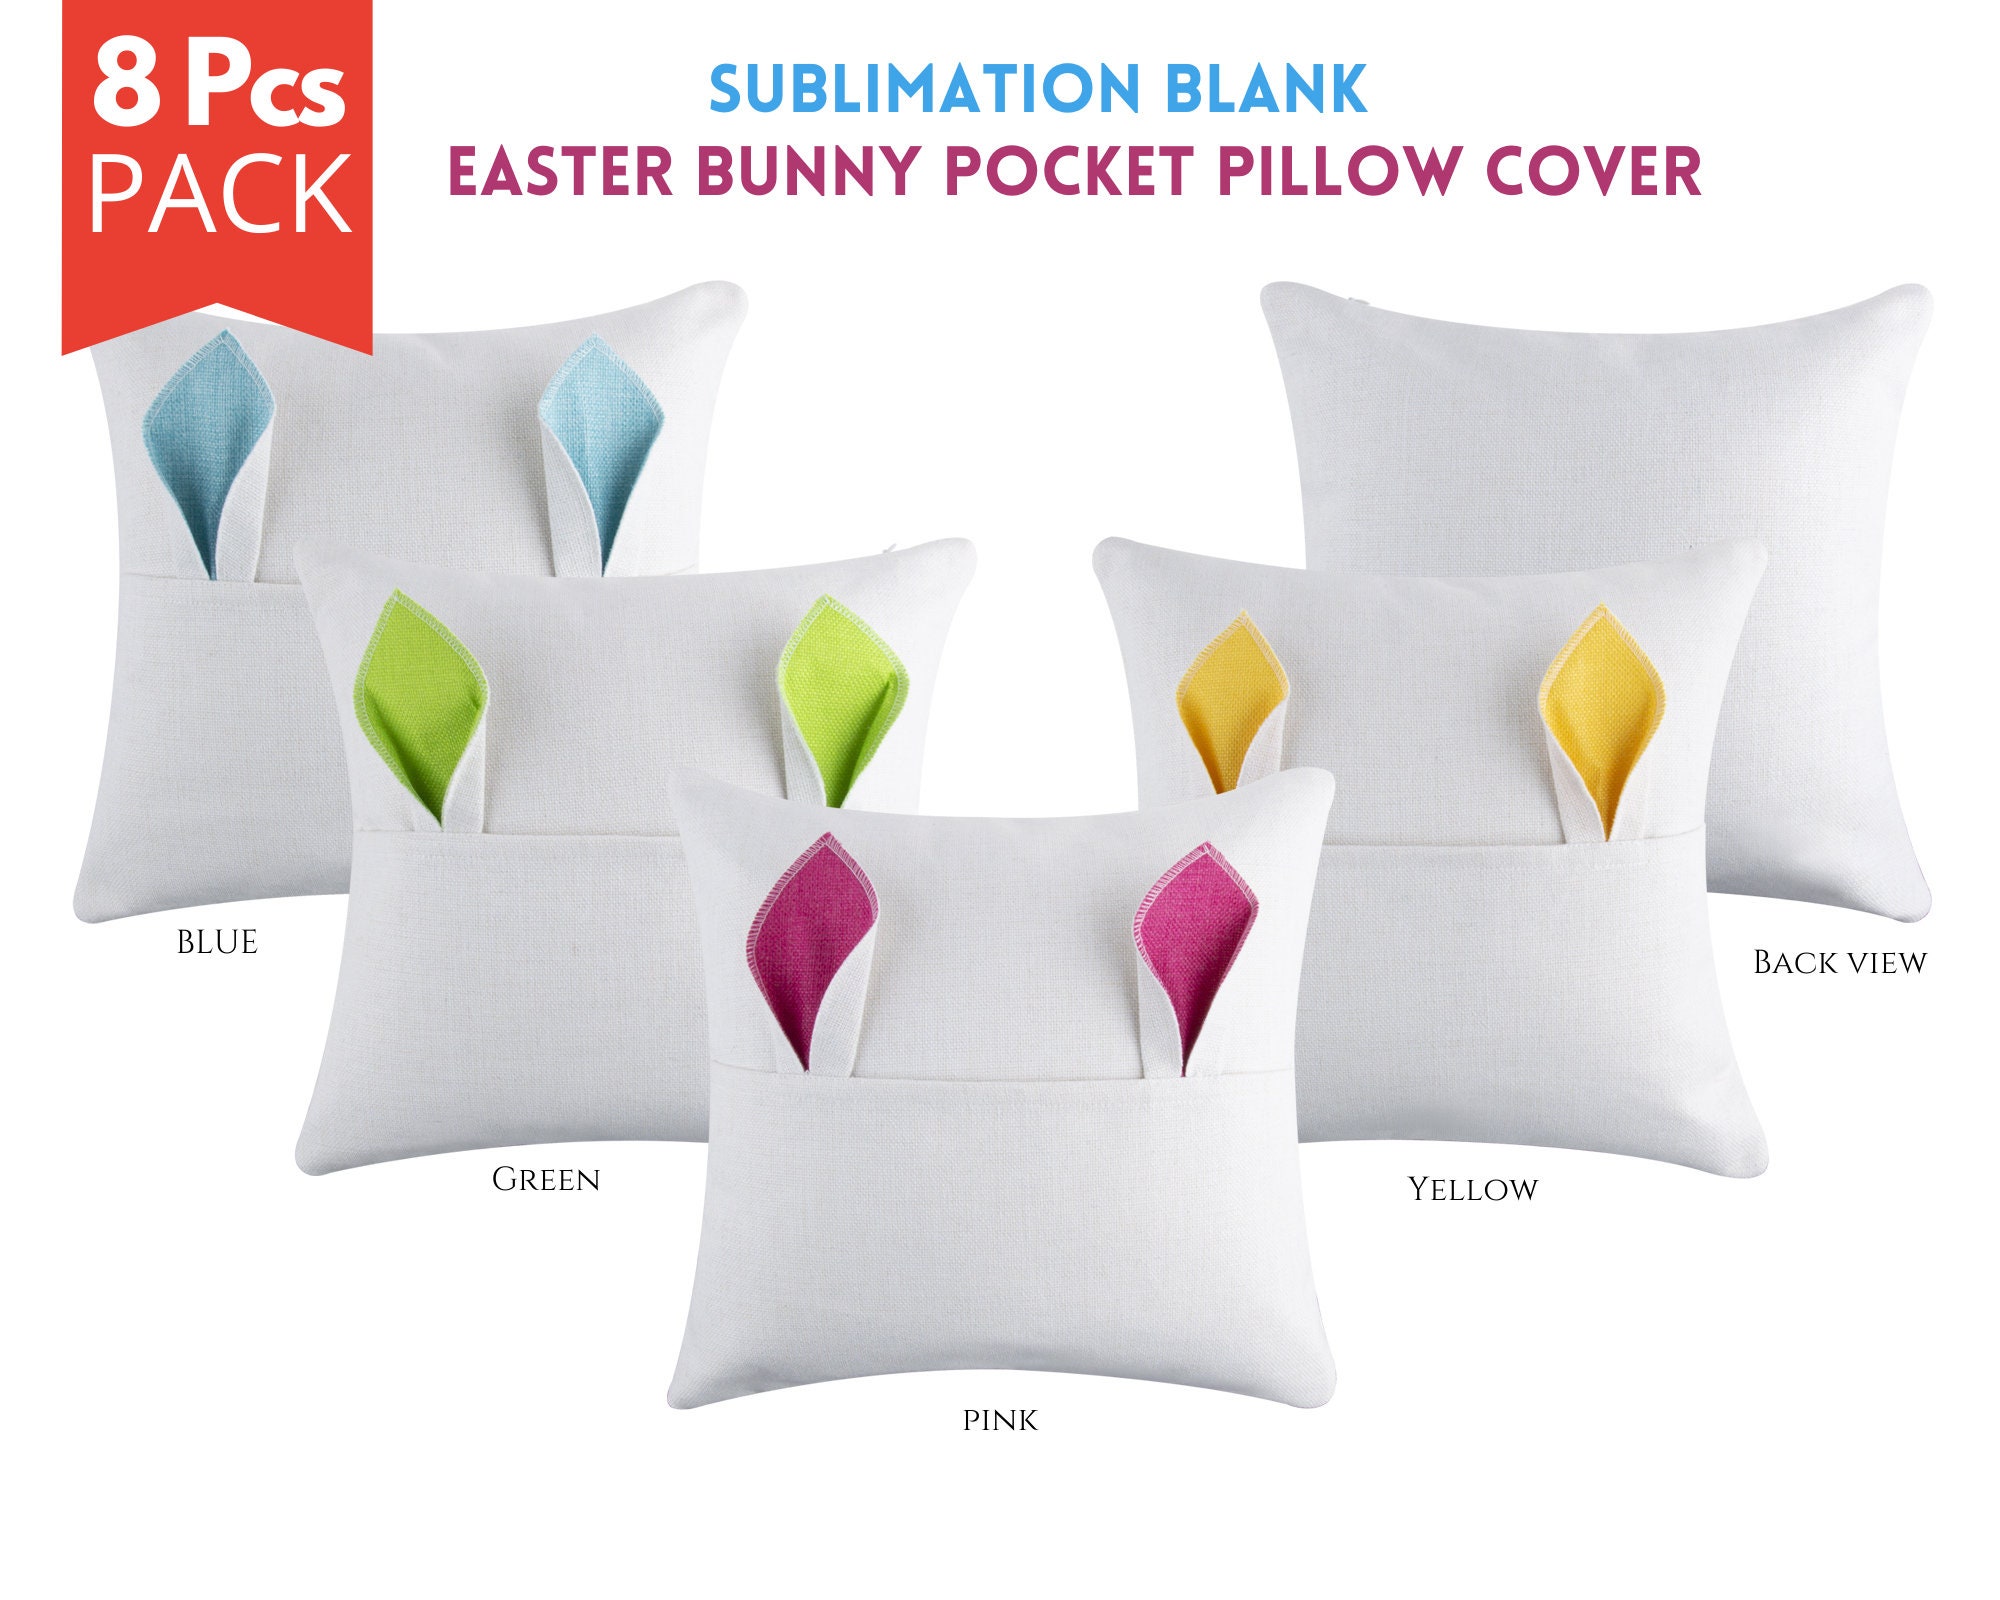 JUSTRY 4 PCS Sublimation Blanks Linen Pillow Cases Cushion Cover Throw  Pillow Covers 18 x 18 Inch for Heat Press Printing Sofa Couch with  Invisible